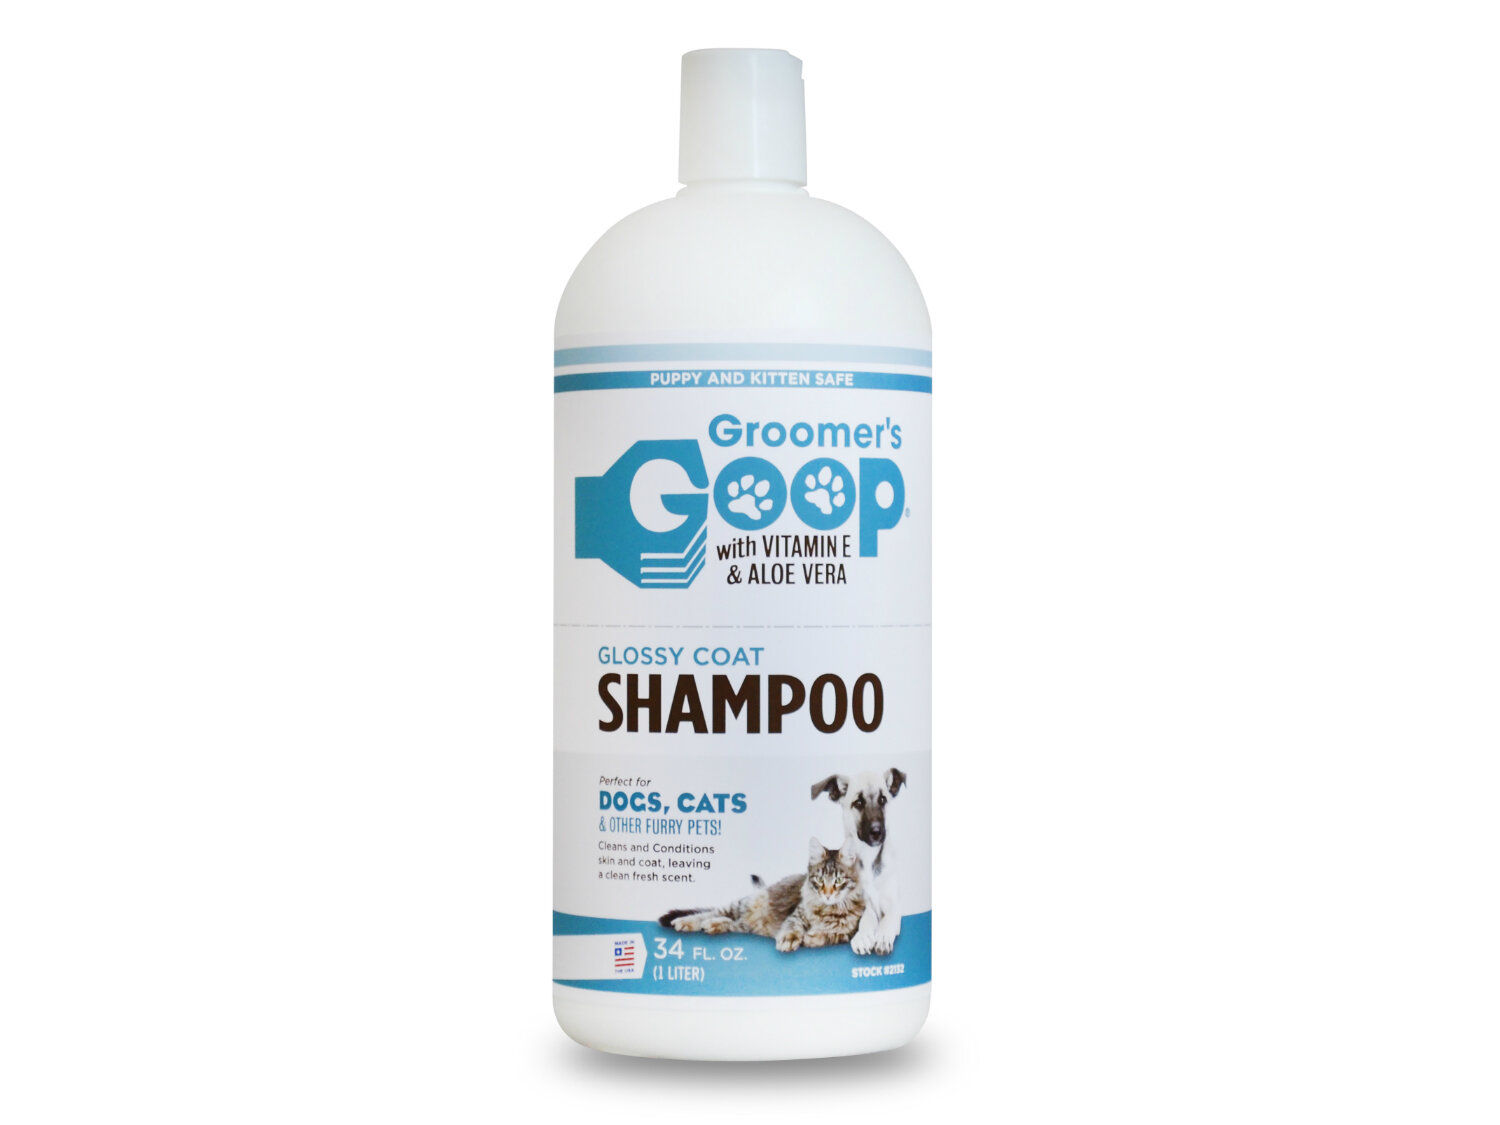 Groomer's Goop Glossy Coat Pet Shampoo - 34 oz. Bottle #2132 — Hand Cleaner and Stain Removers, All Goop Cleaners